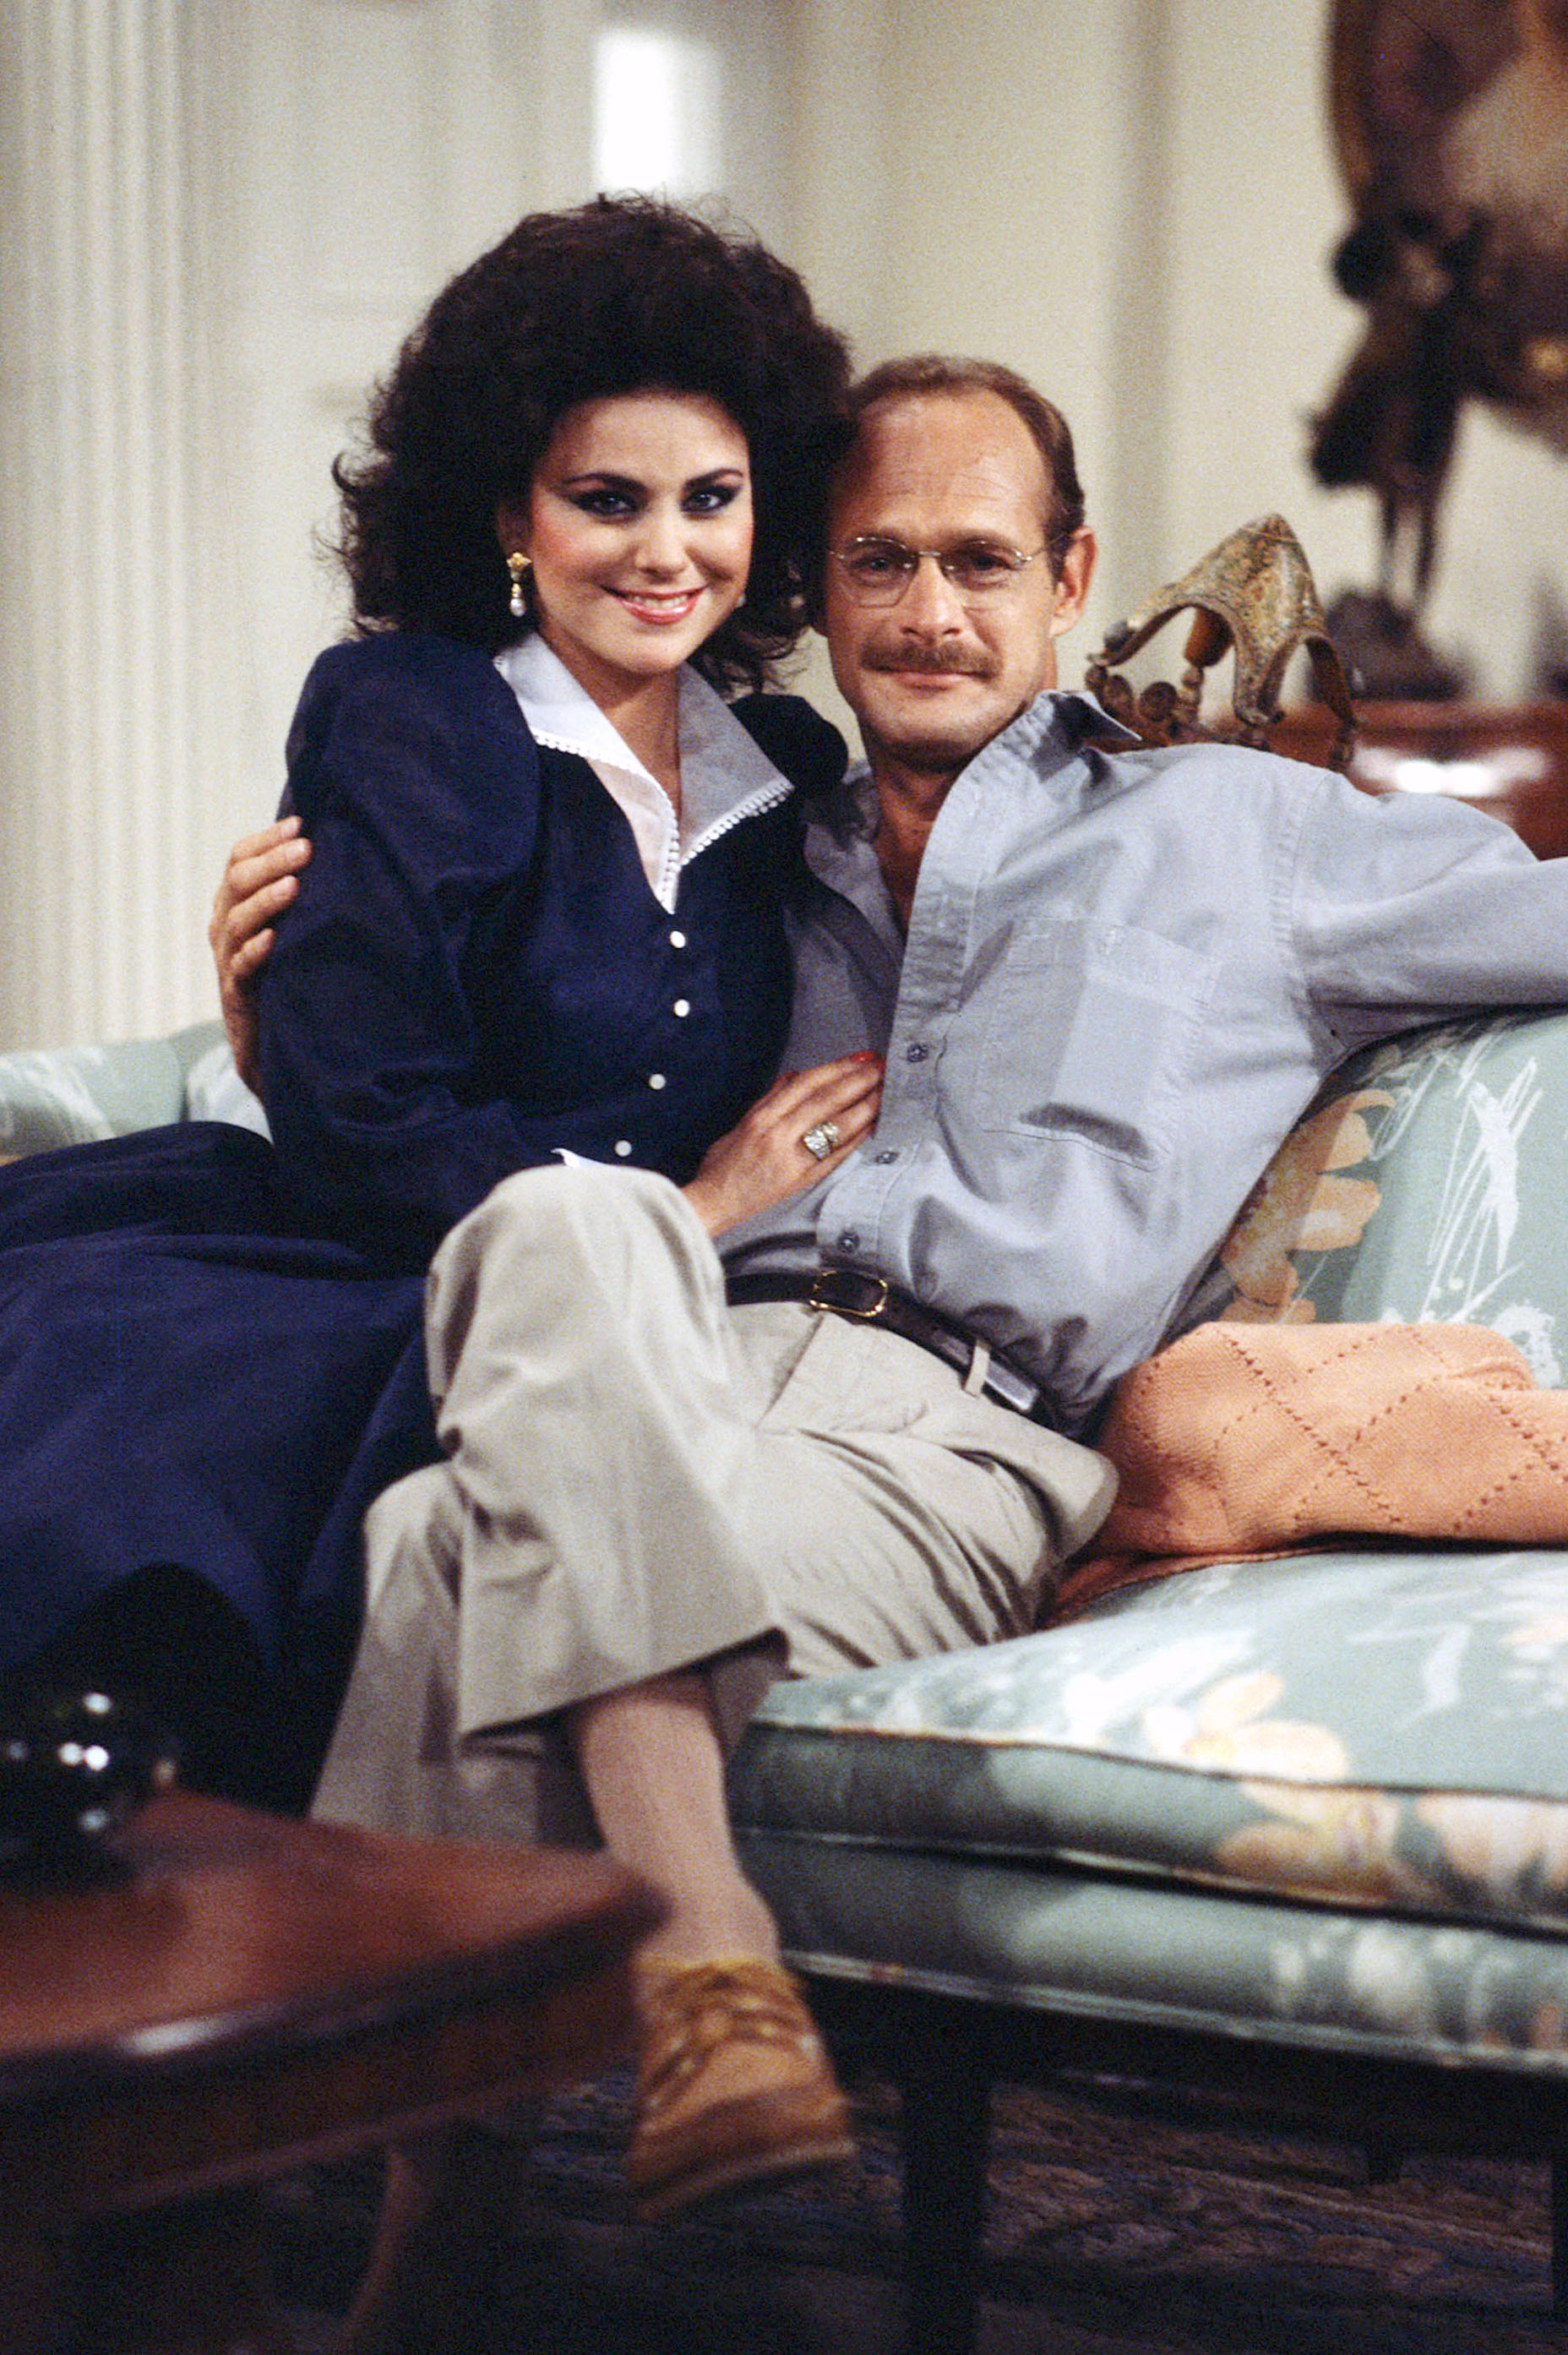 Delta Burke as Suzanne Sugarbaker and Gerald McRaney as Dash Goff in "Designing Women," circa 1987 | Source: Getty Images